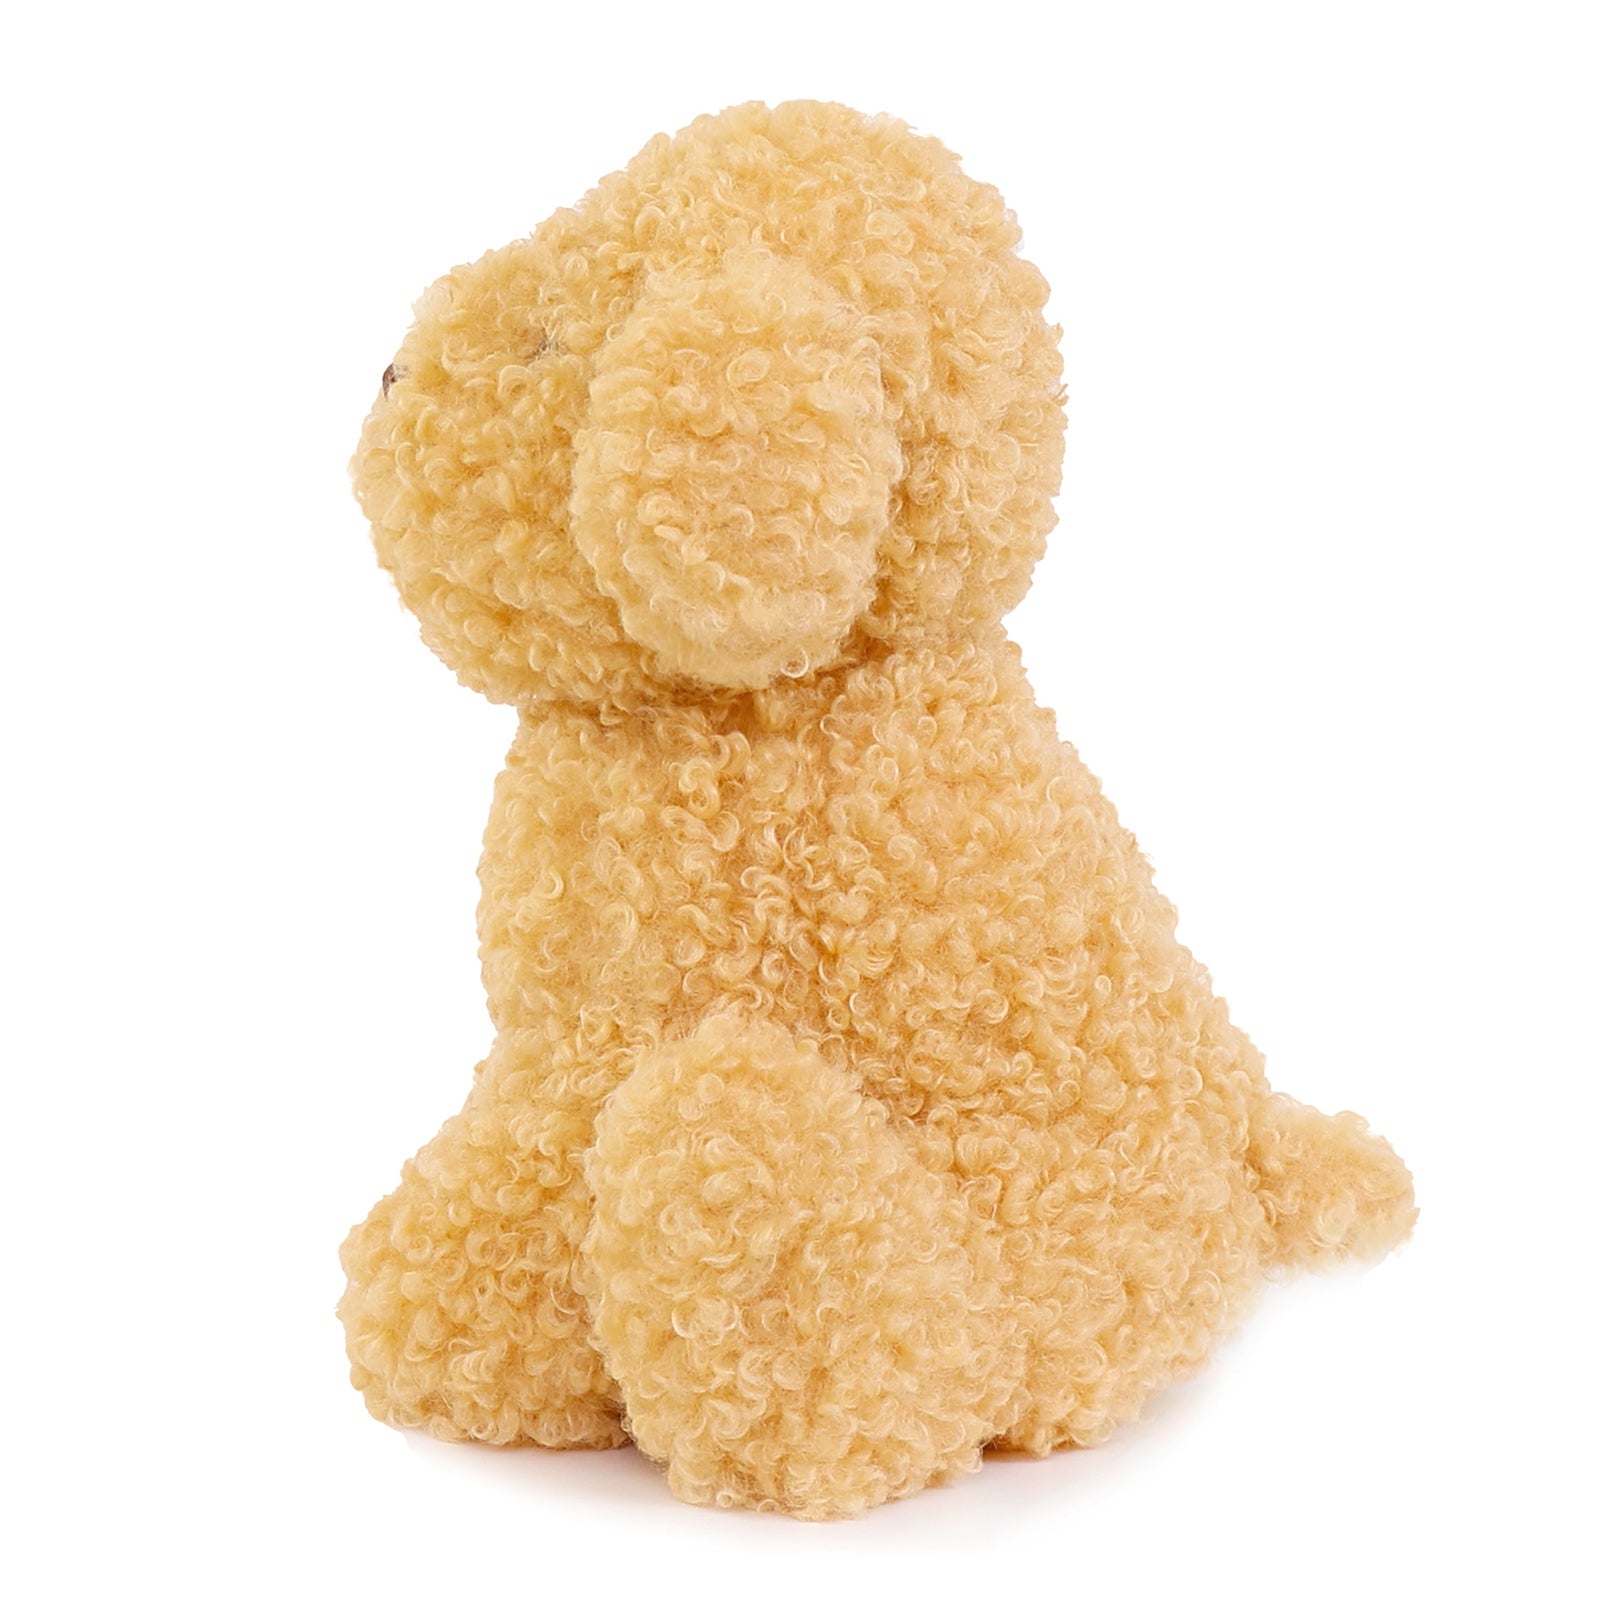 OB Designs Lucky Labradoodle Soft Toy